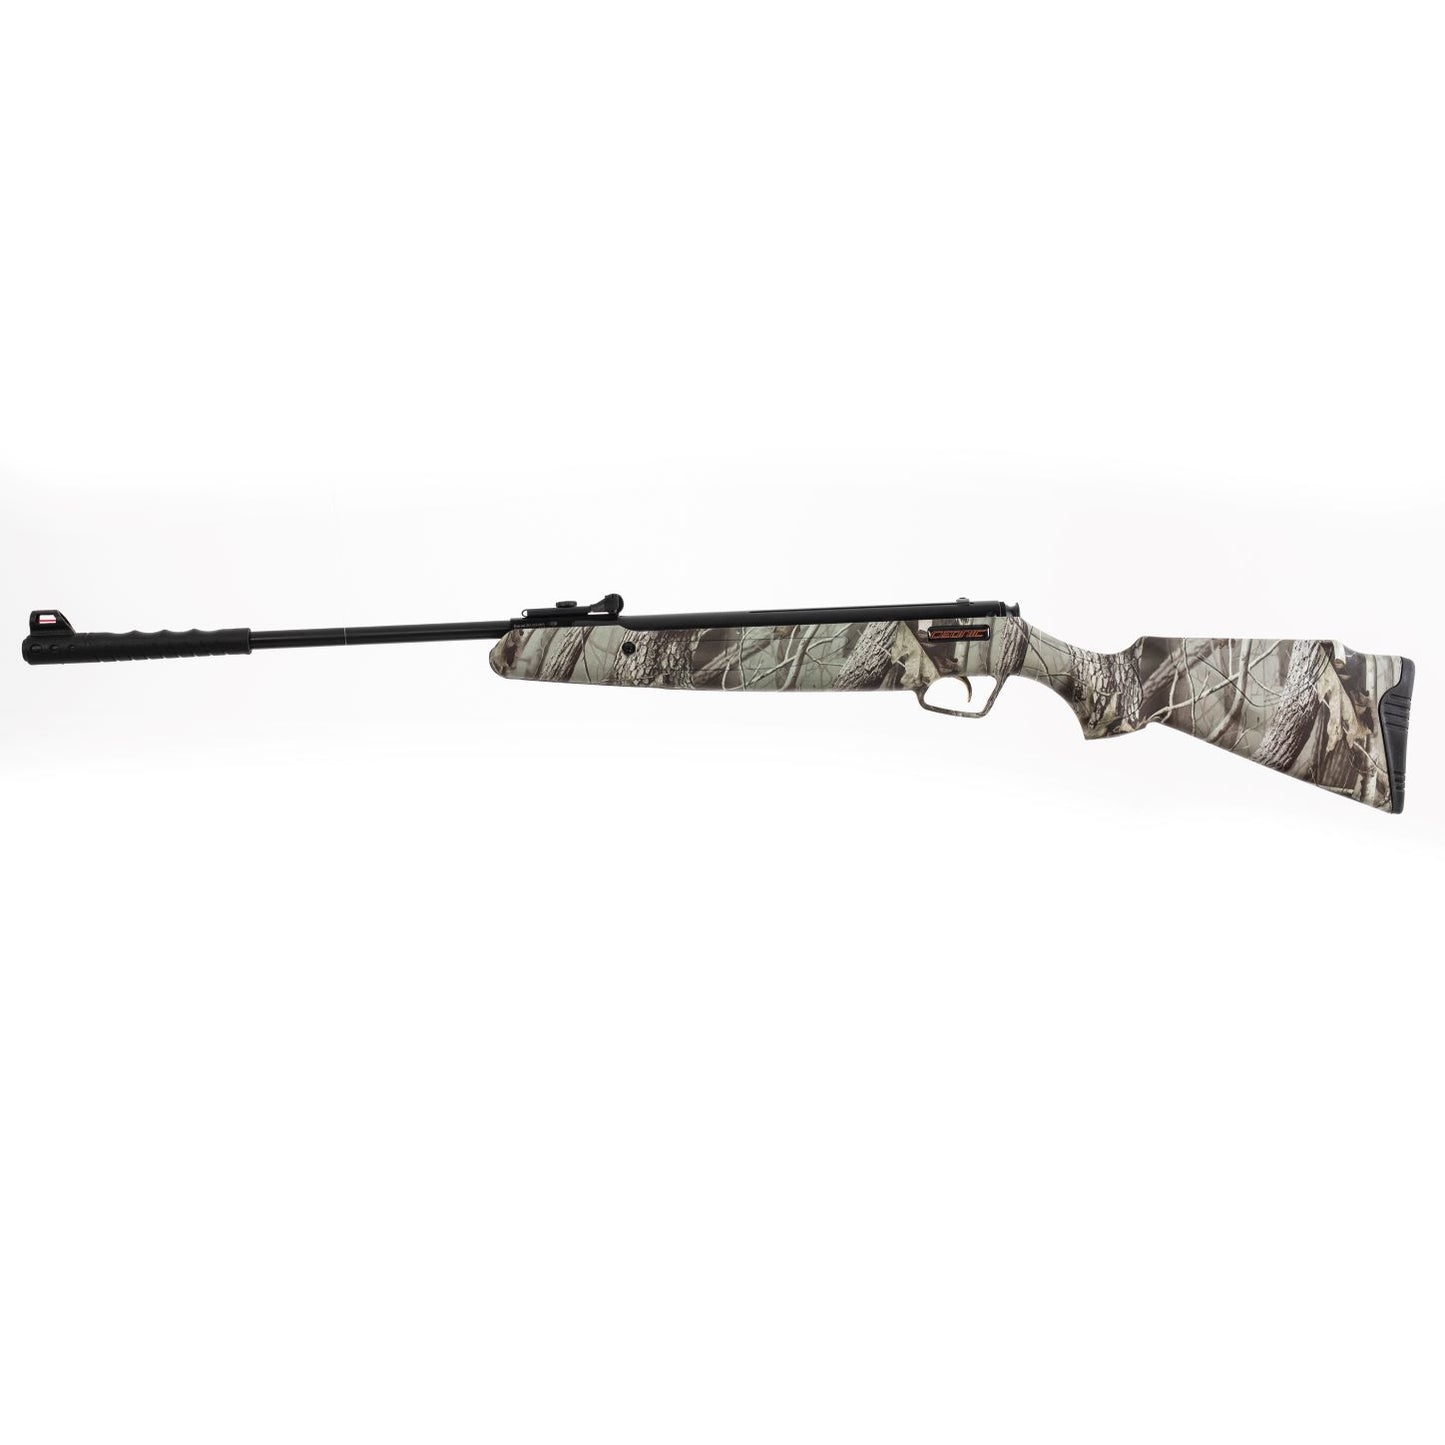 Left side view of a camo Ceonic Spring Piston Air Rifle